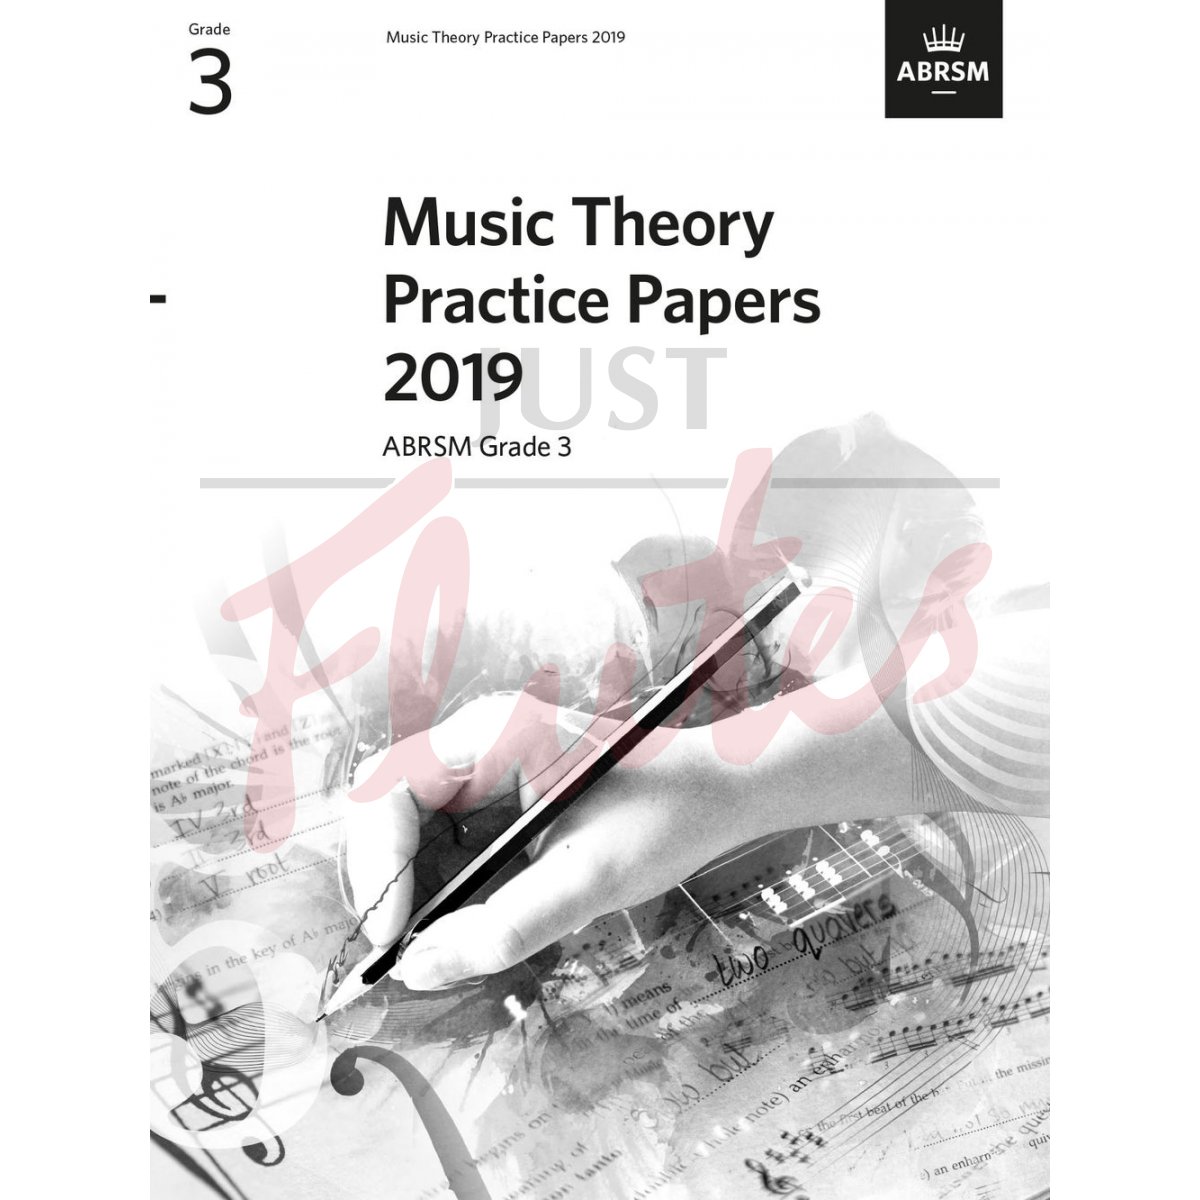 Music Theory Practice Papers 2019 Grade 3